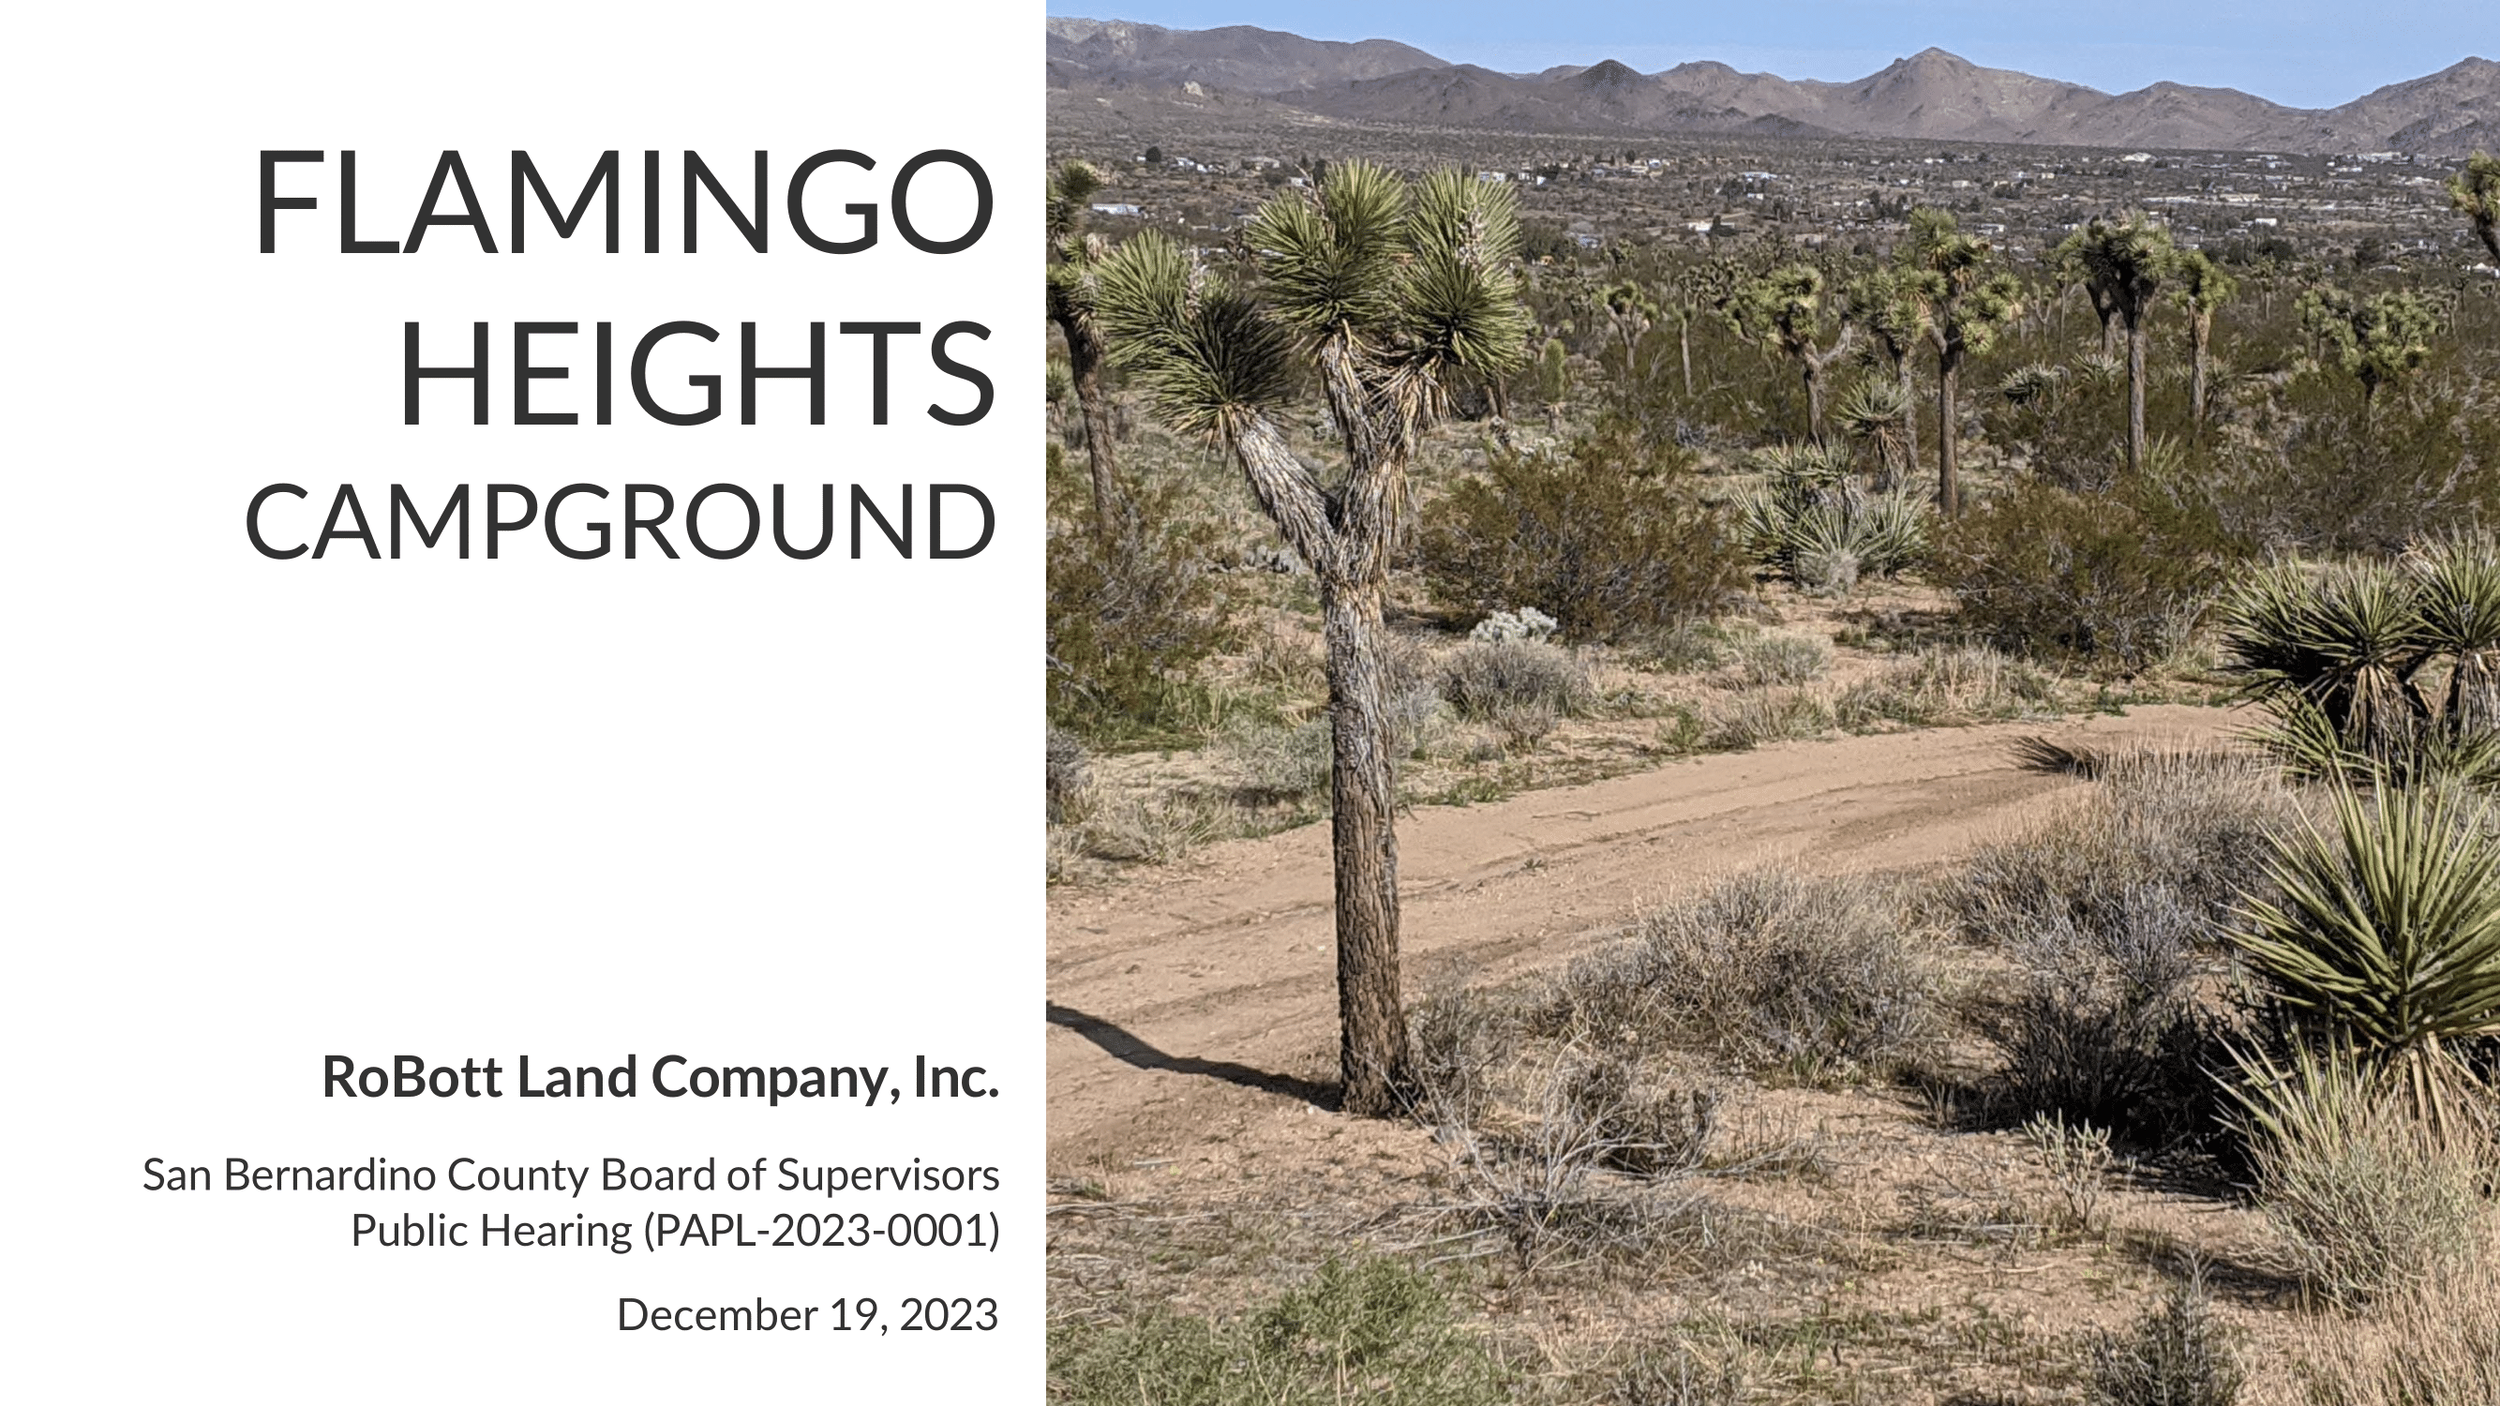 23-11-28 PAPL-20230-0001 Flamingo Heights Campground-01.png